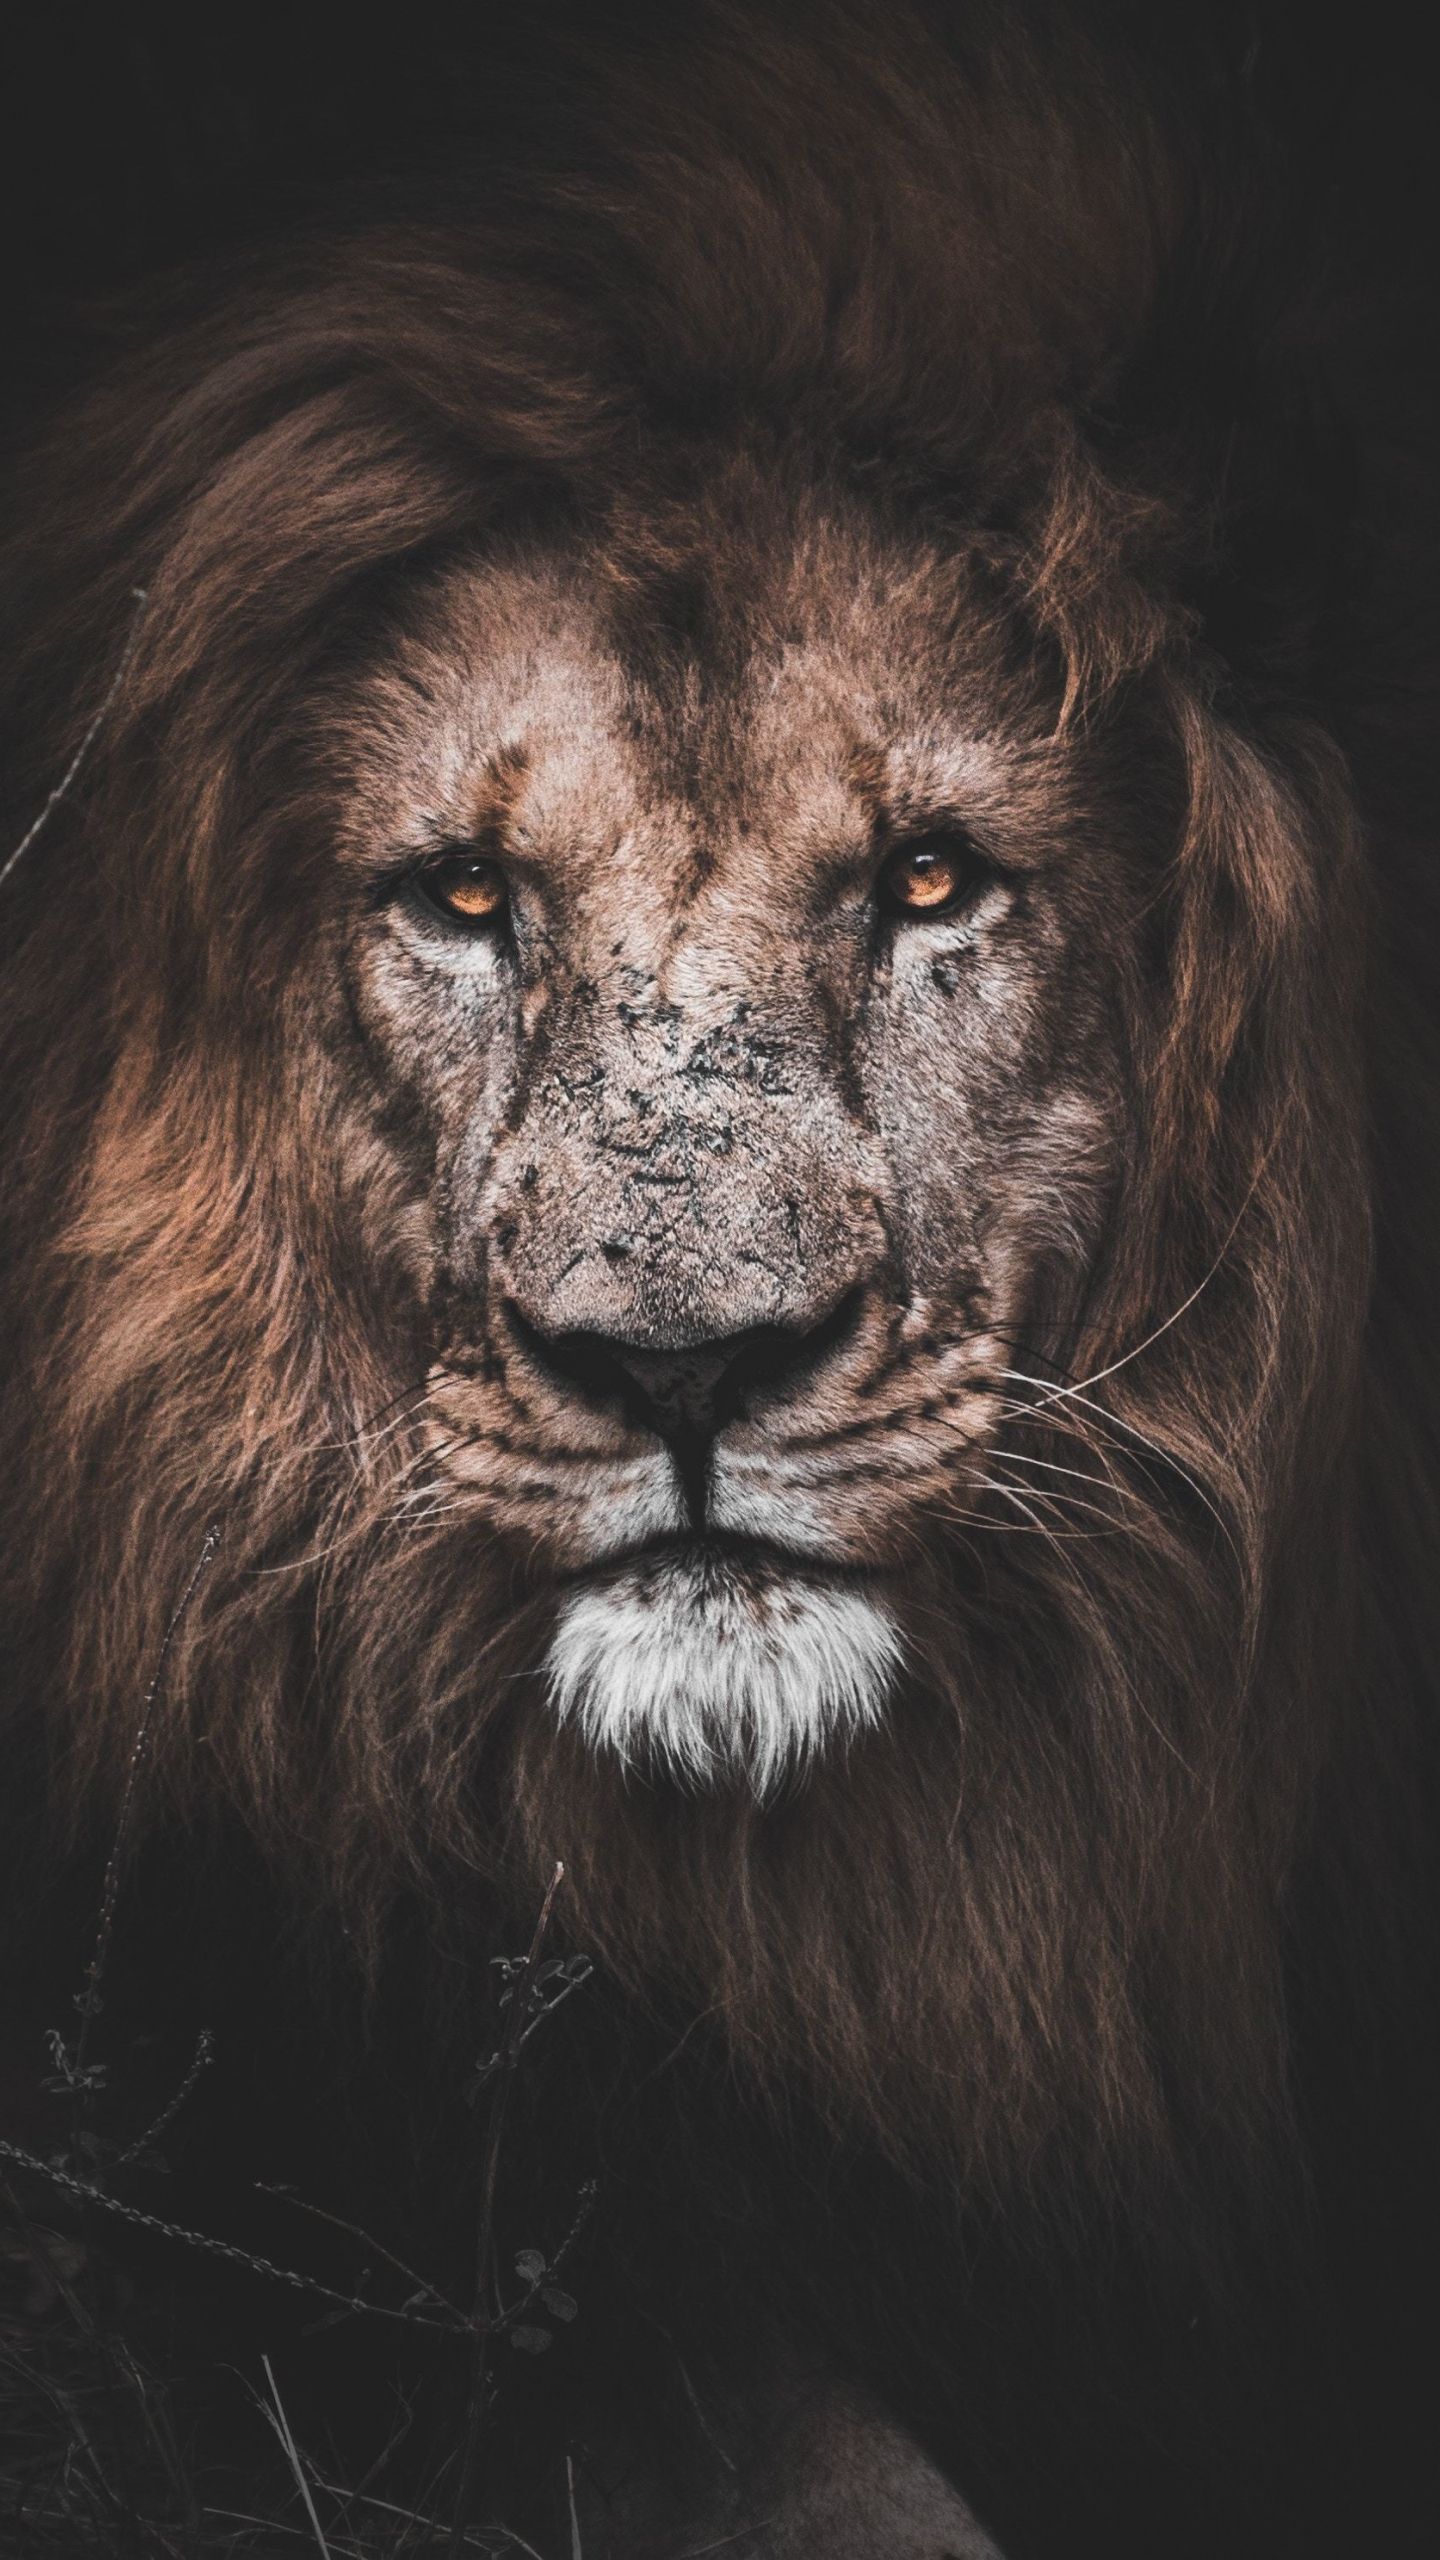 Download 1440x2560 wallpaper might lion, animal, muzzle, qhd samsung galaxy s s edge, note, lg g 1440x2560 HD image, background, 9947